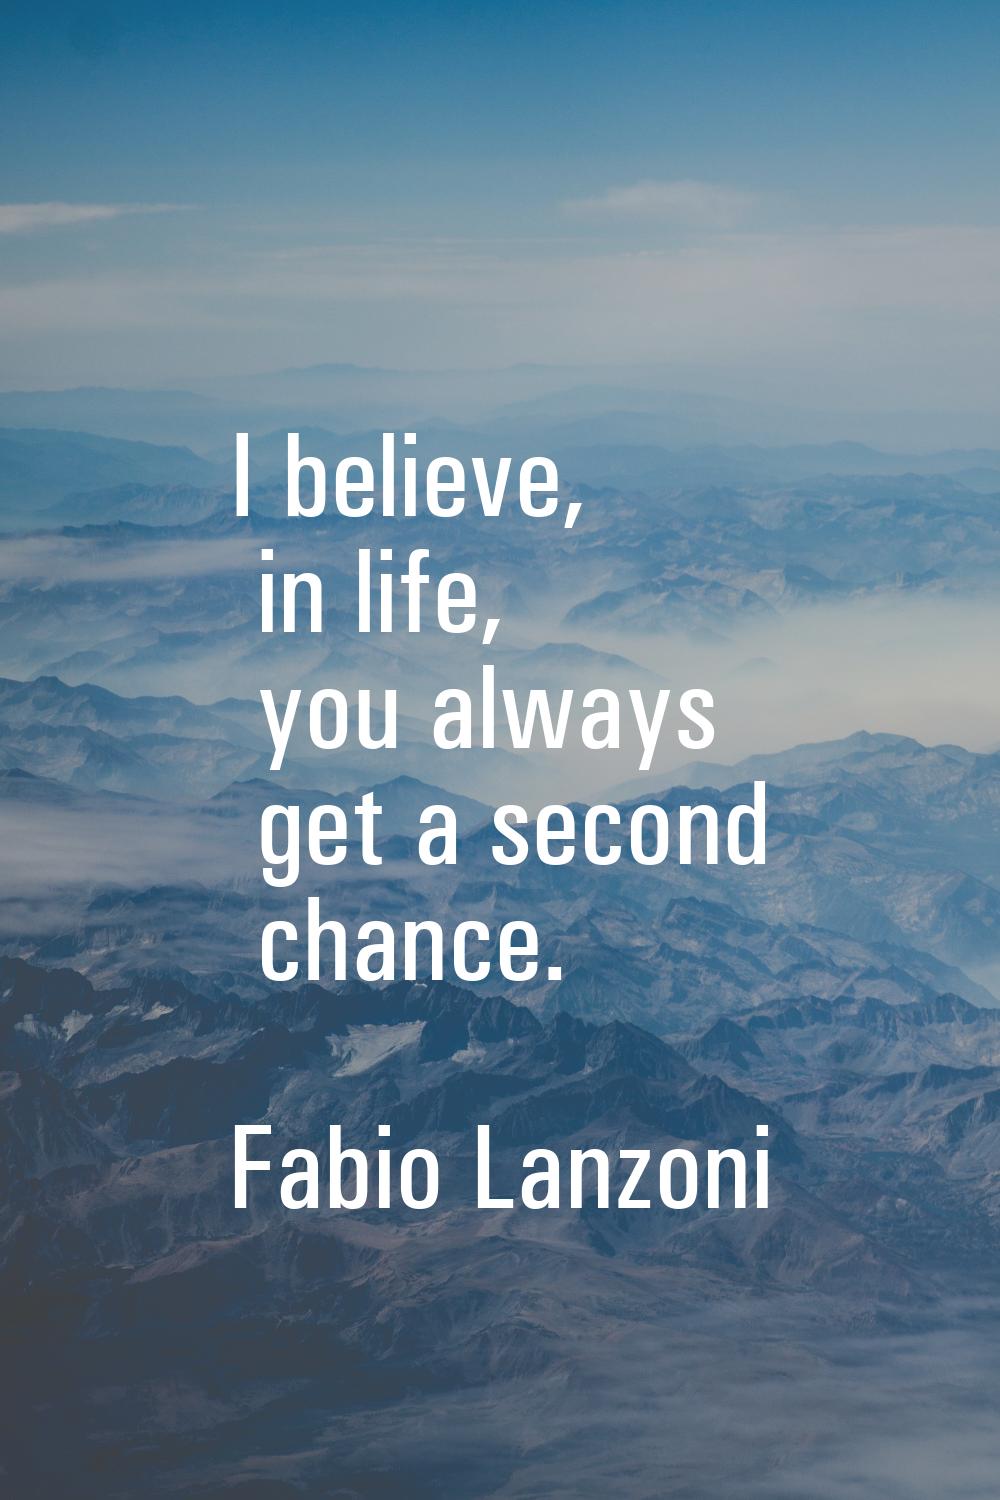 I believe, in life, you always get a second chance.